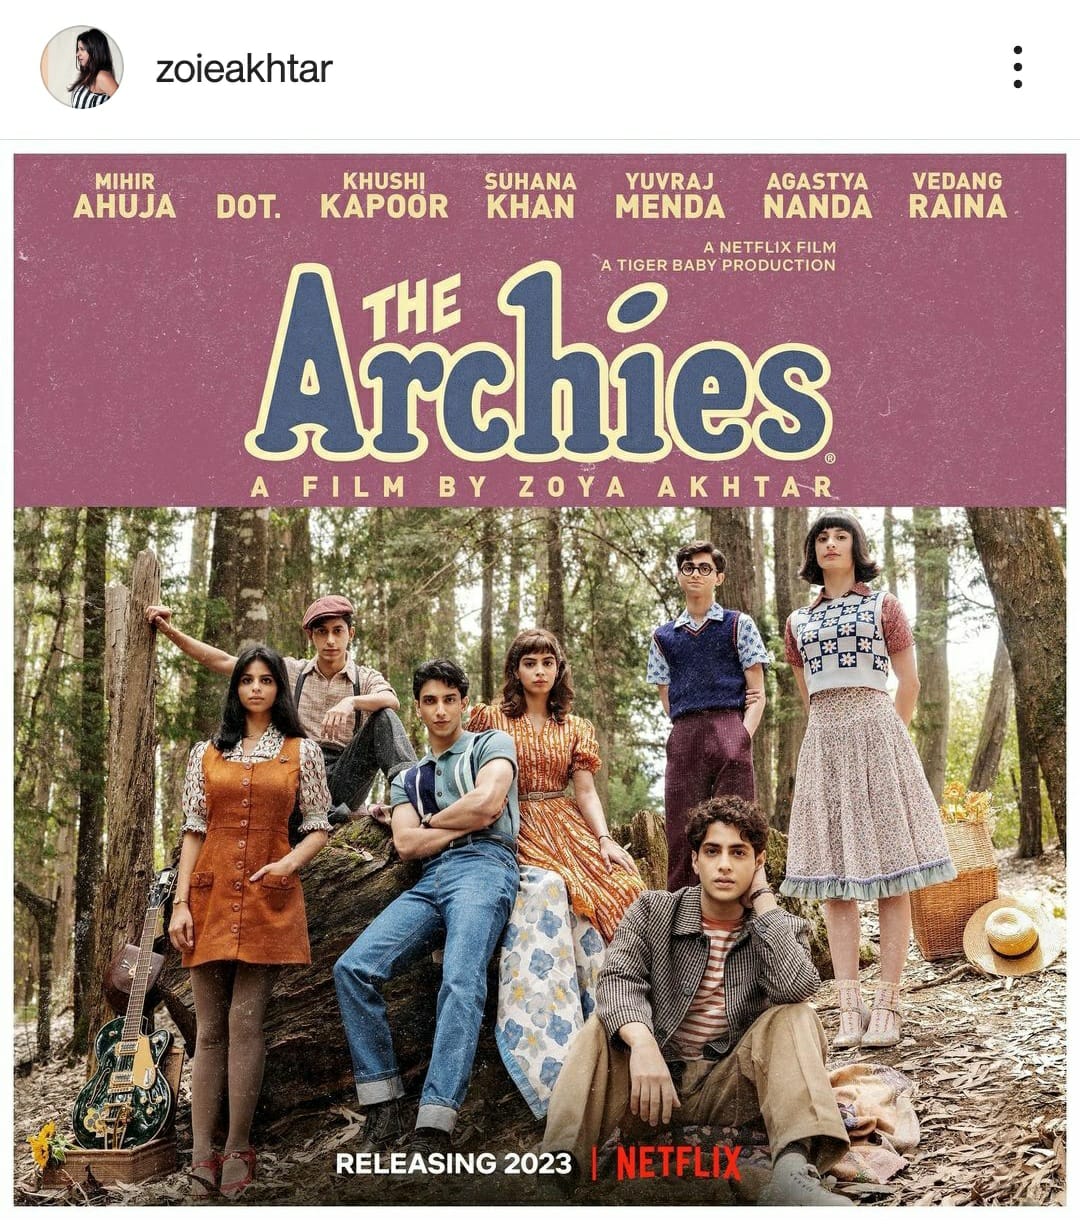 The poster of The Archies shared by Zoya Akhtar.